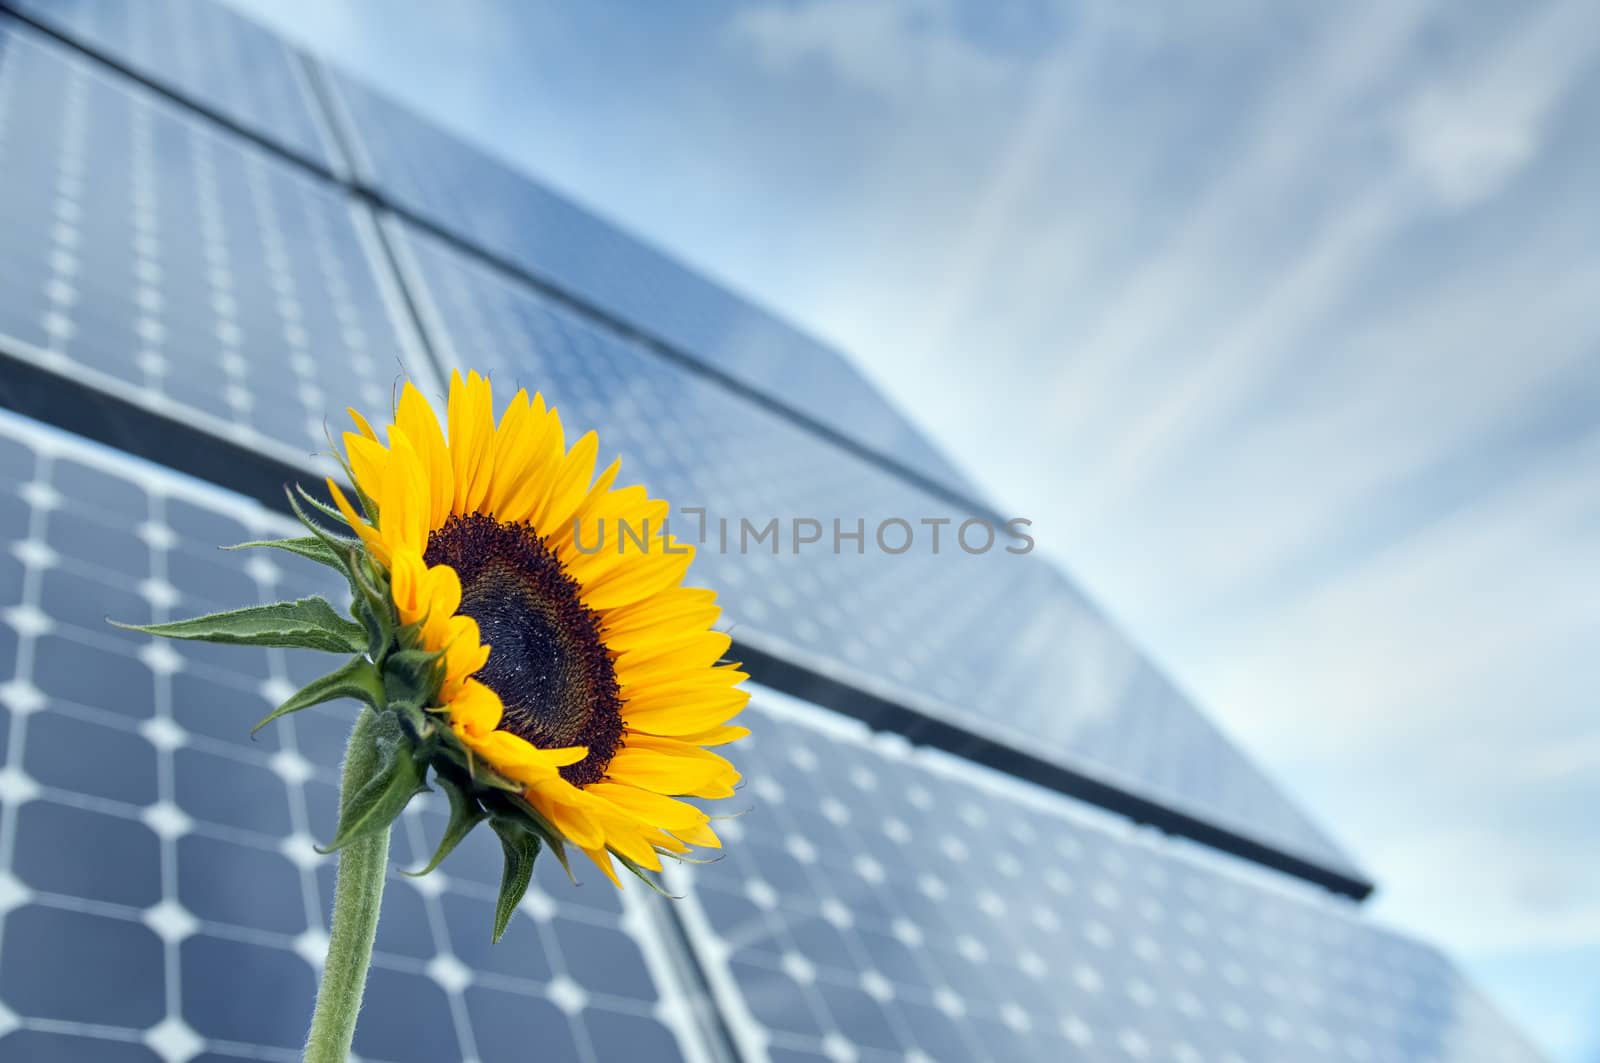 Sunflower with solar panels in the background against the blue sky